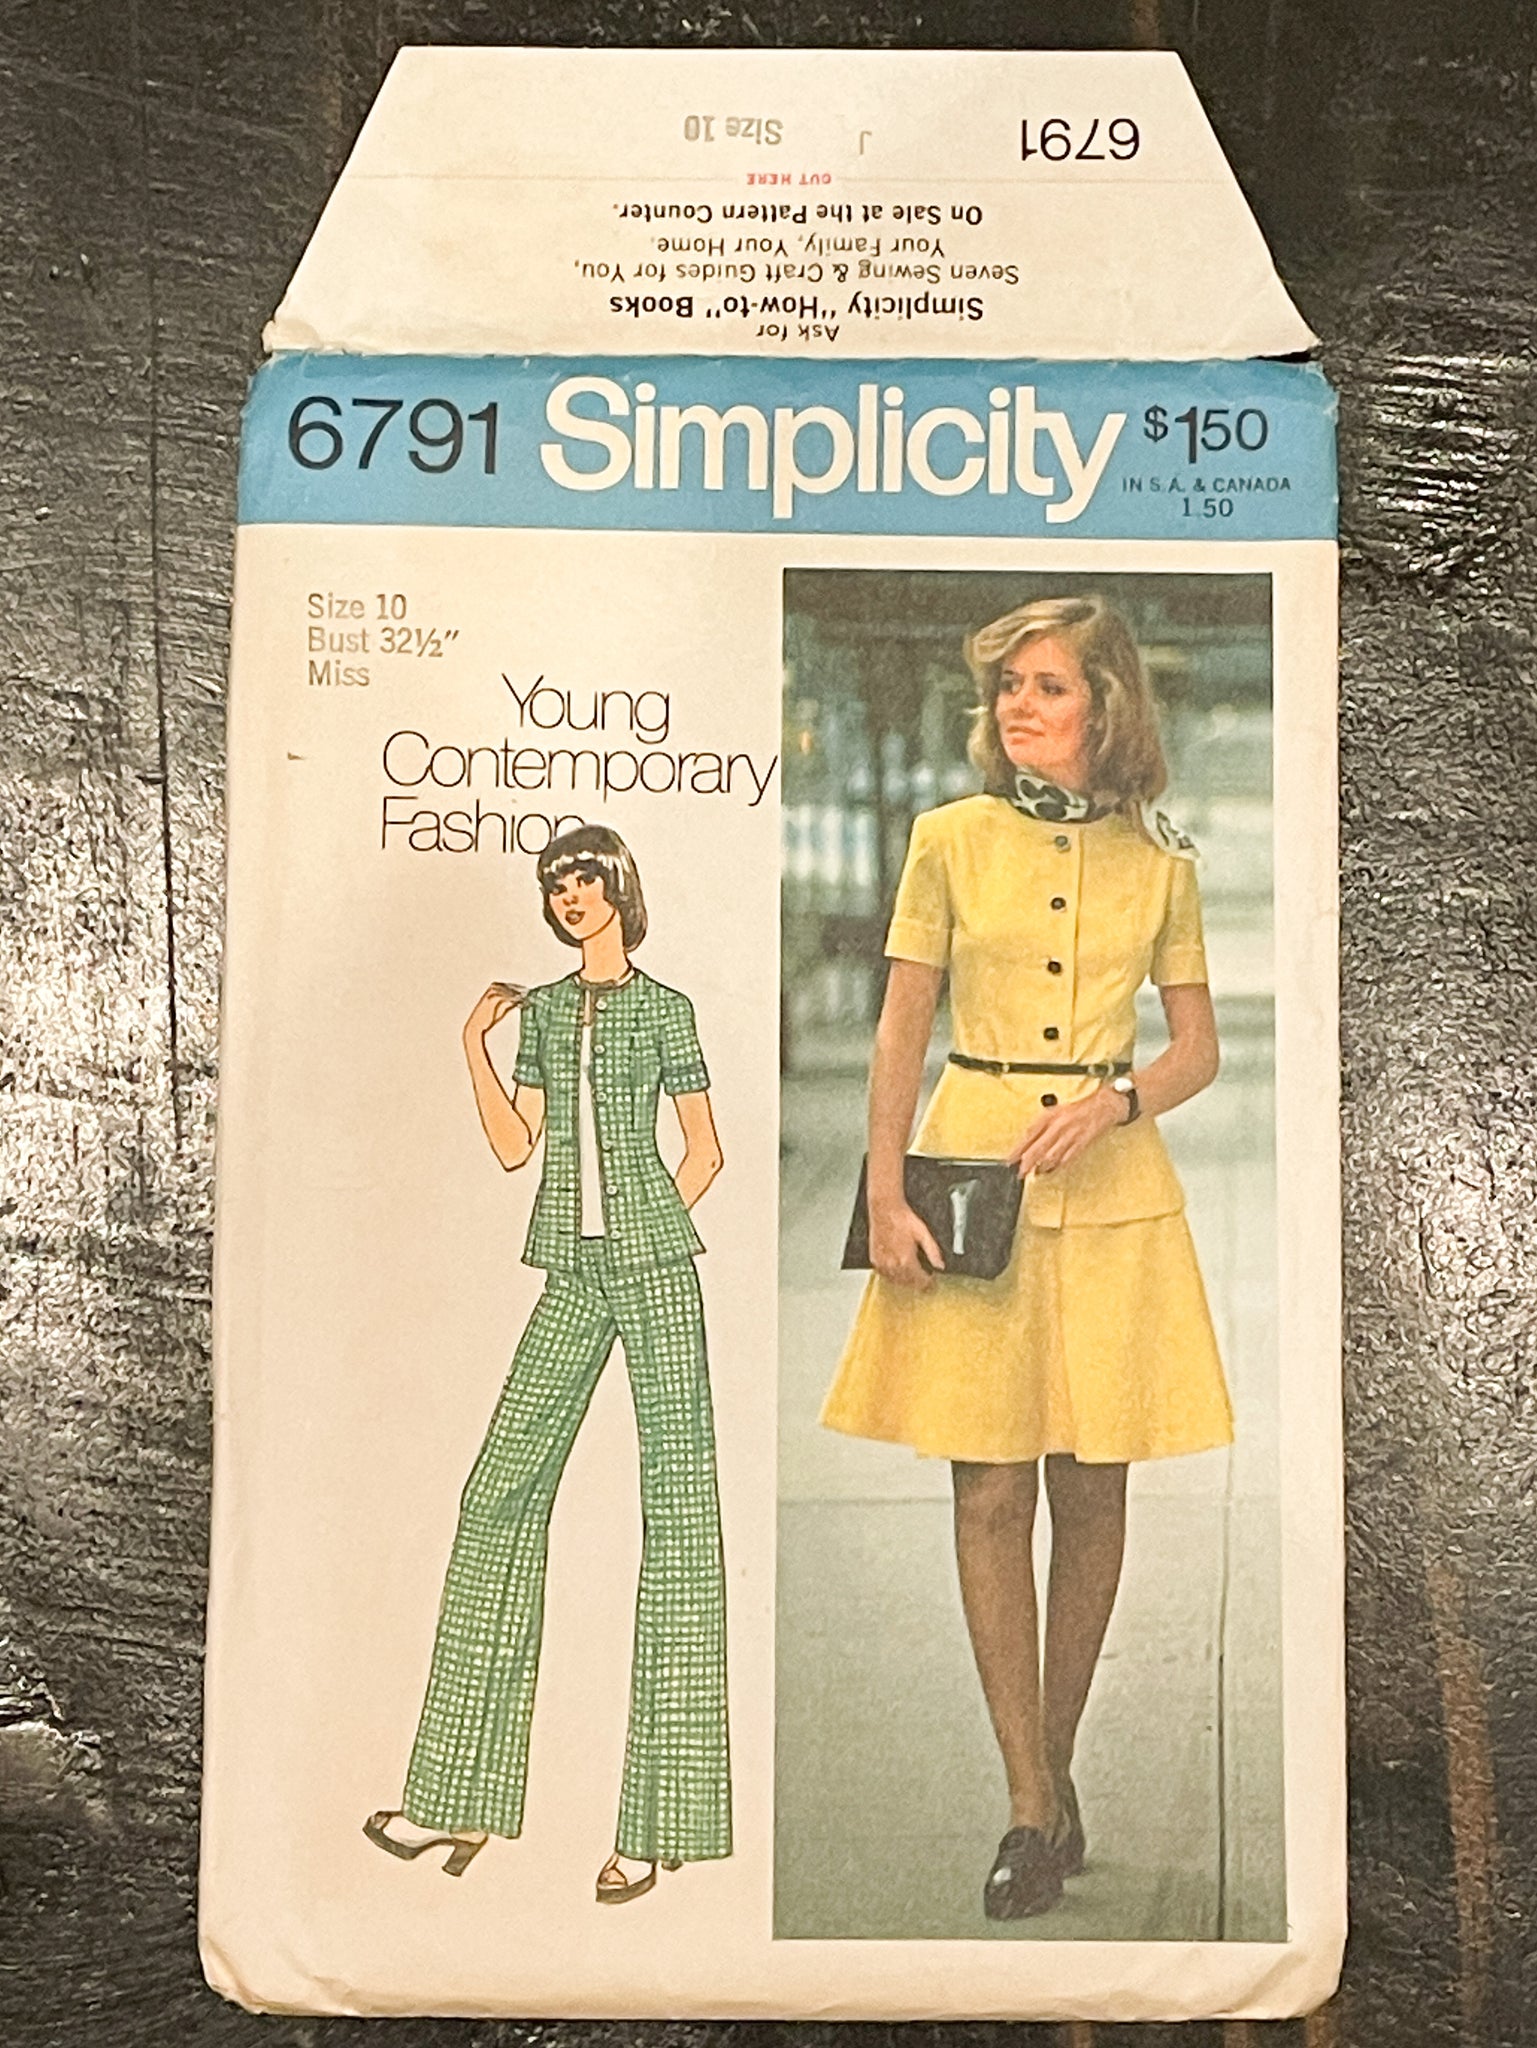 SALE 1974 Simplicity 6791 Pattern - Women's Top, Skirt and Pants